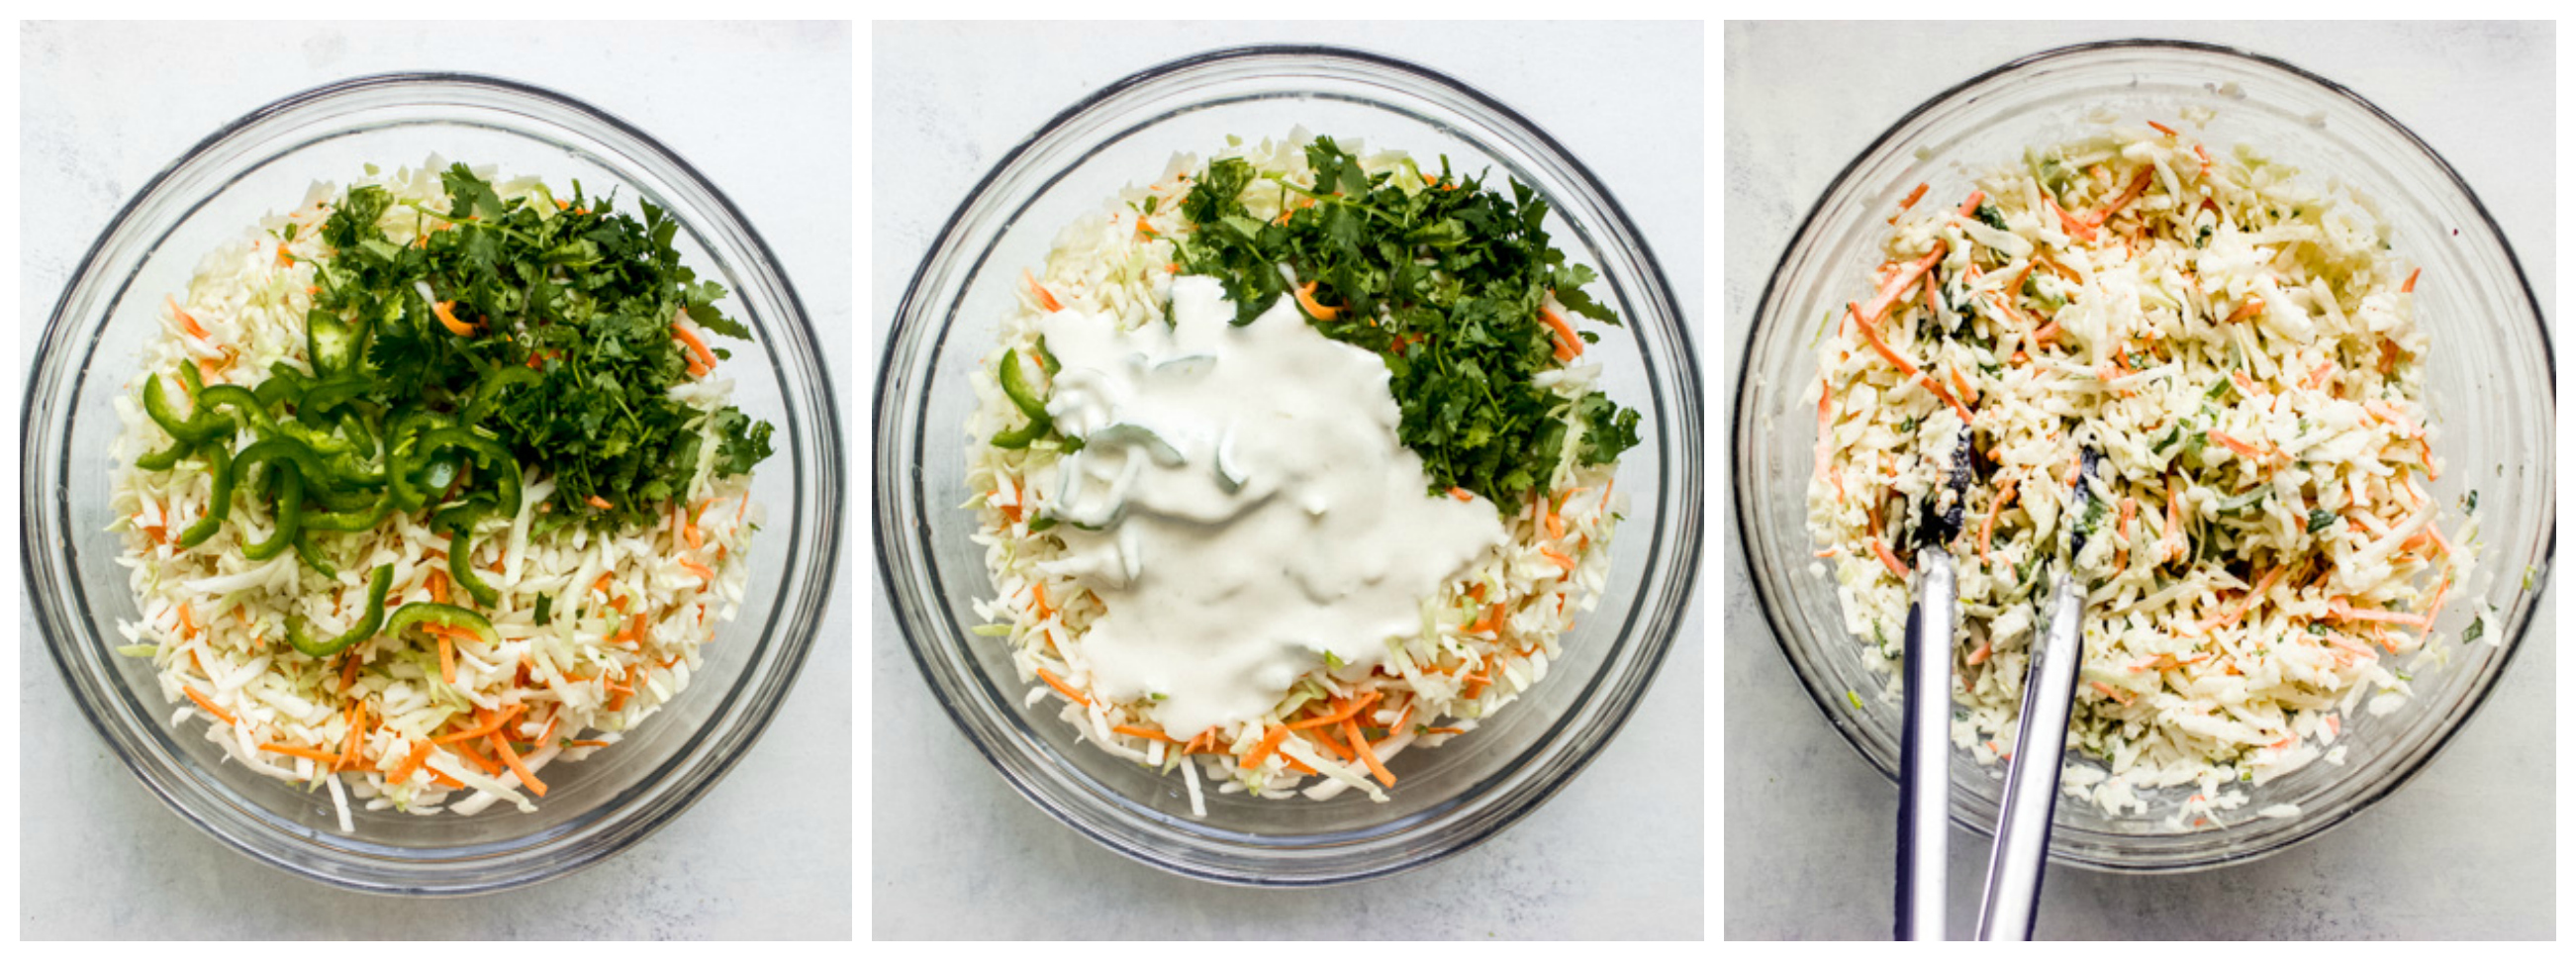 slaw with dressing in a bowl